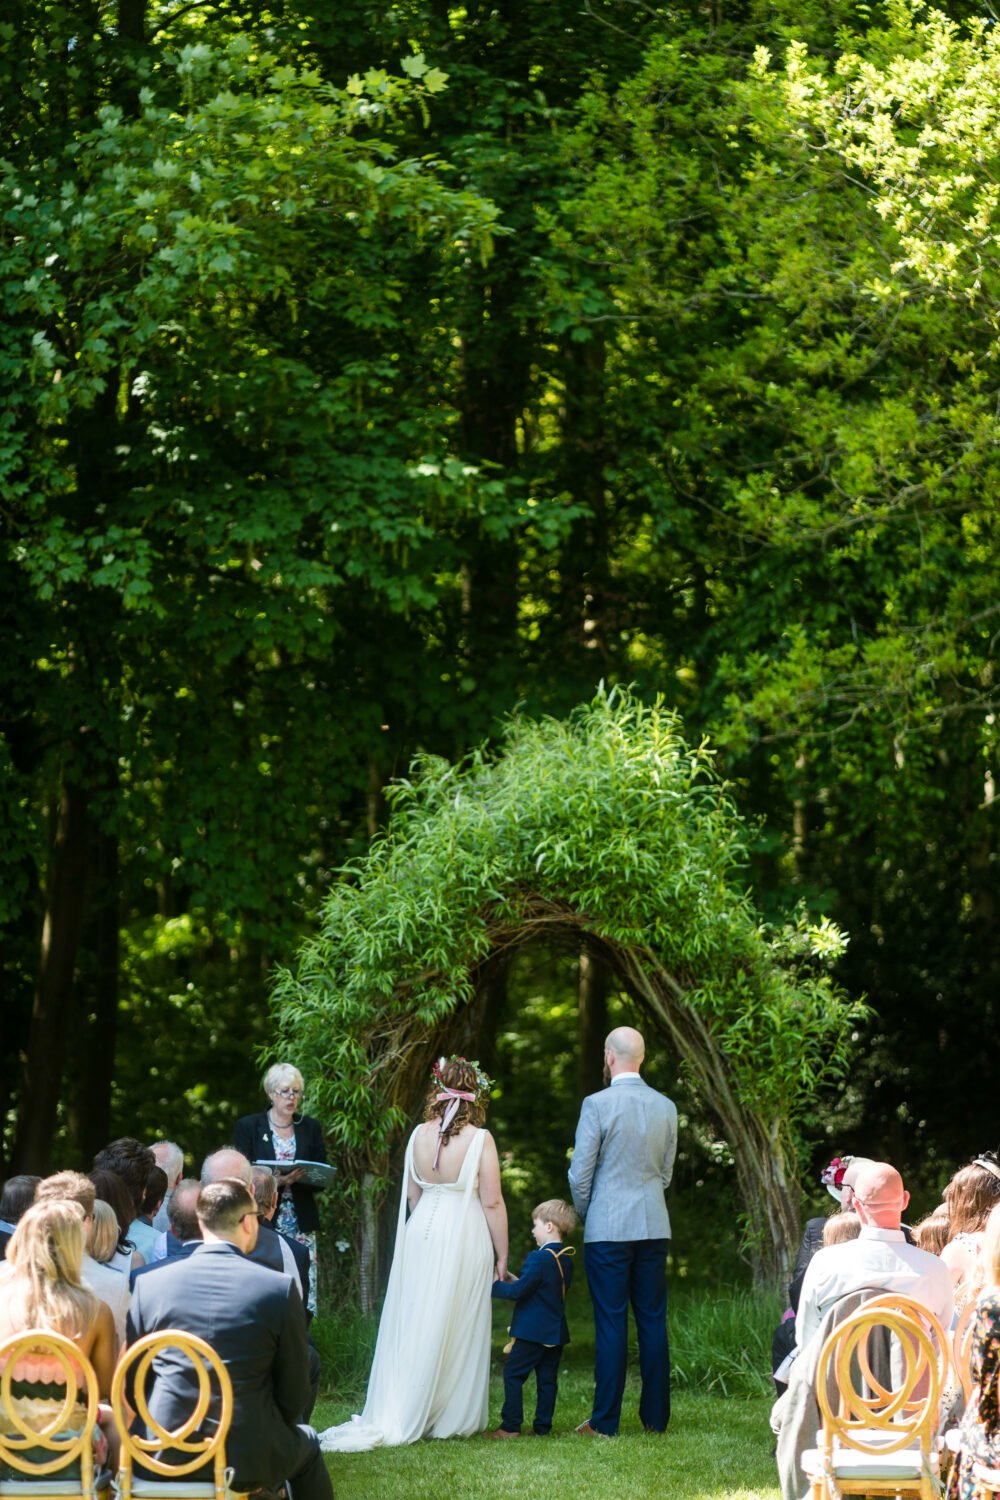 Couple ceremony shot at a Chaucer Barn wedding in Norfolk in the woodland area